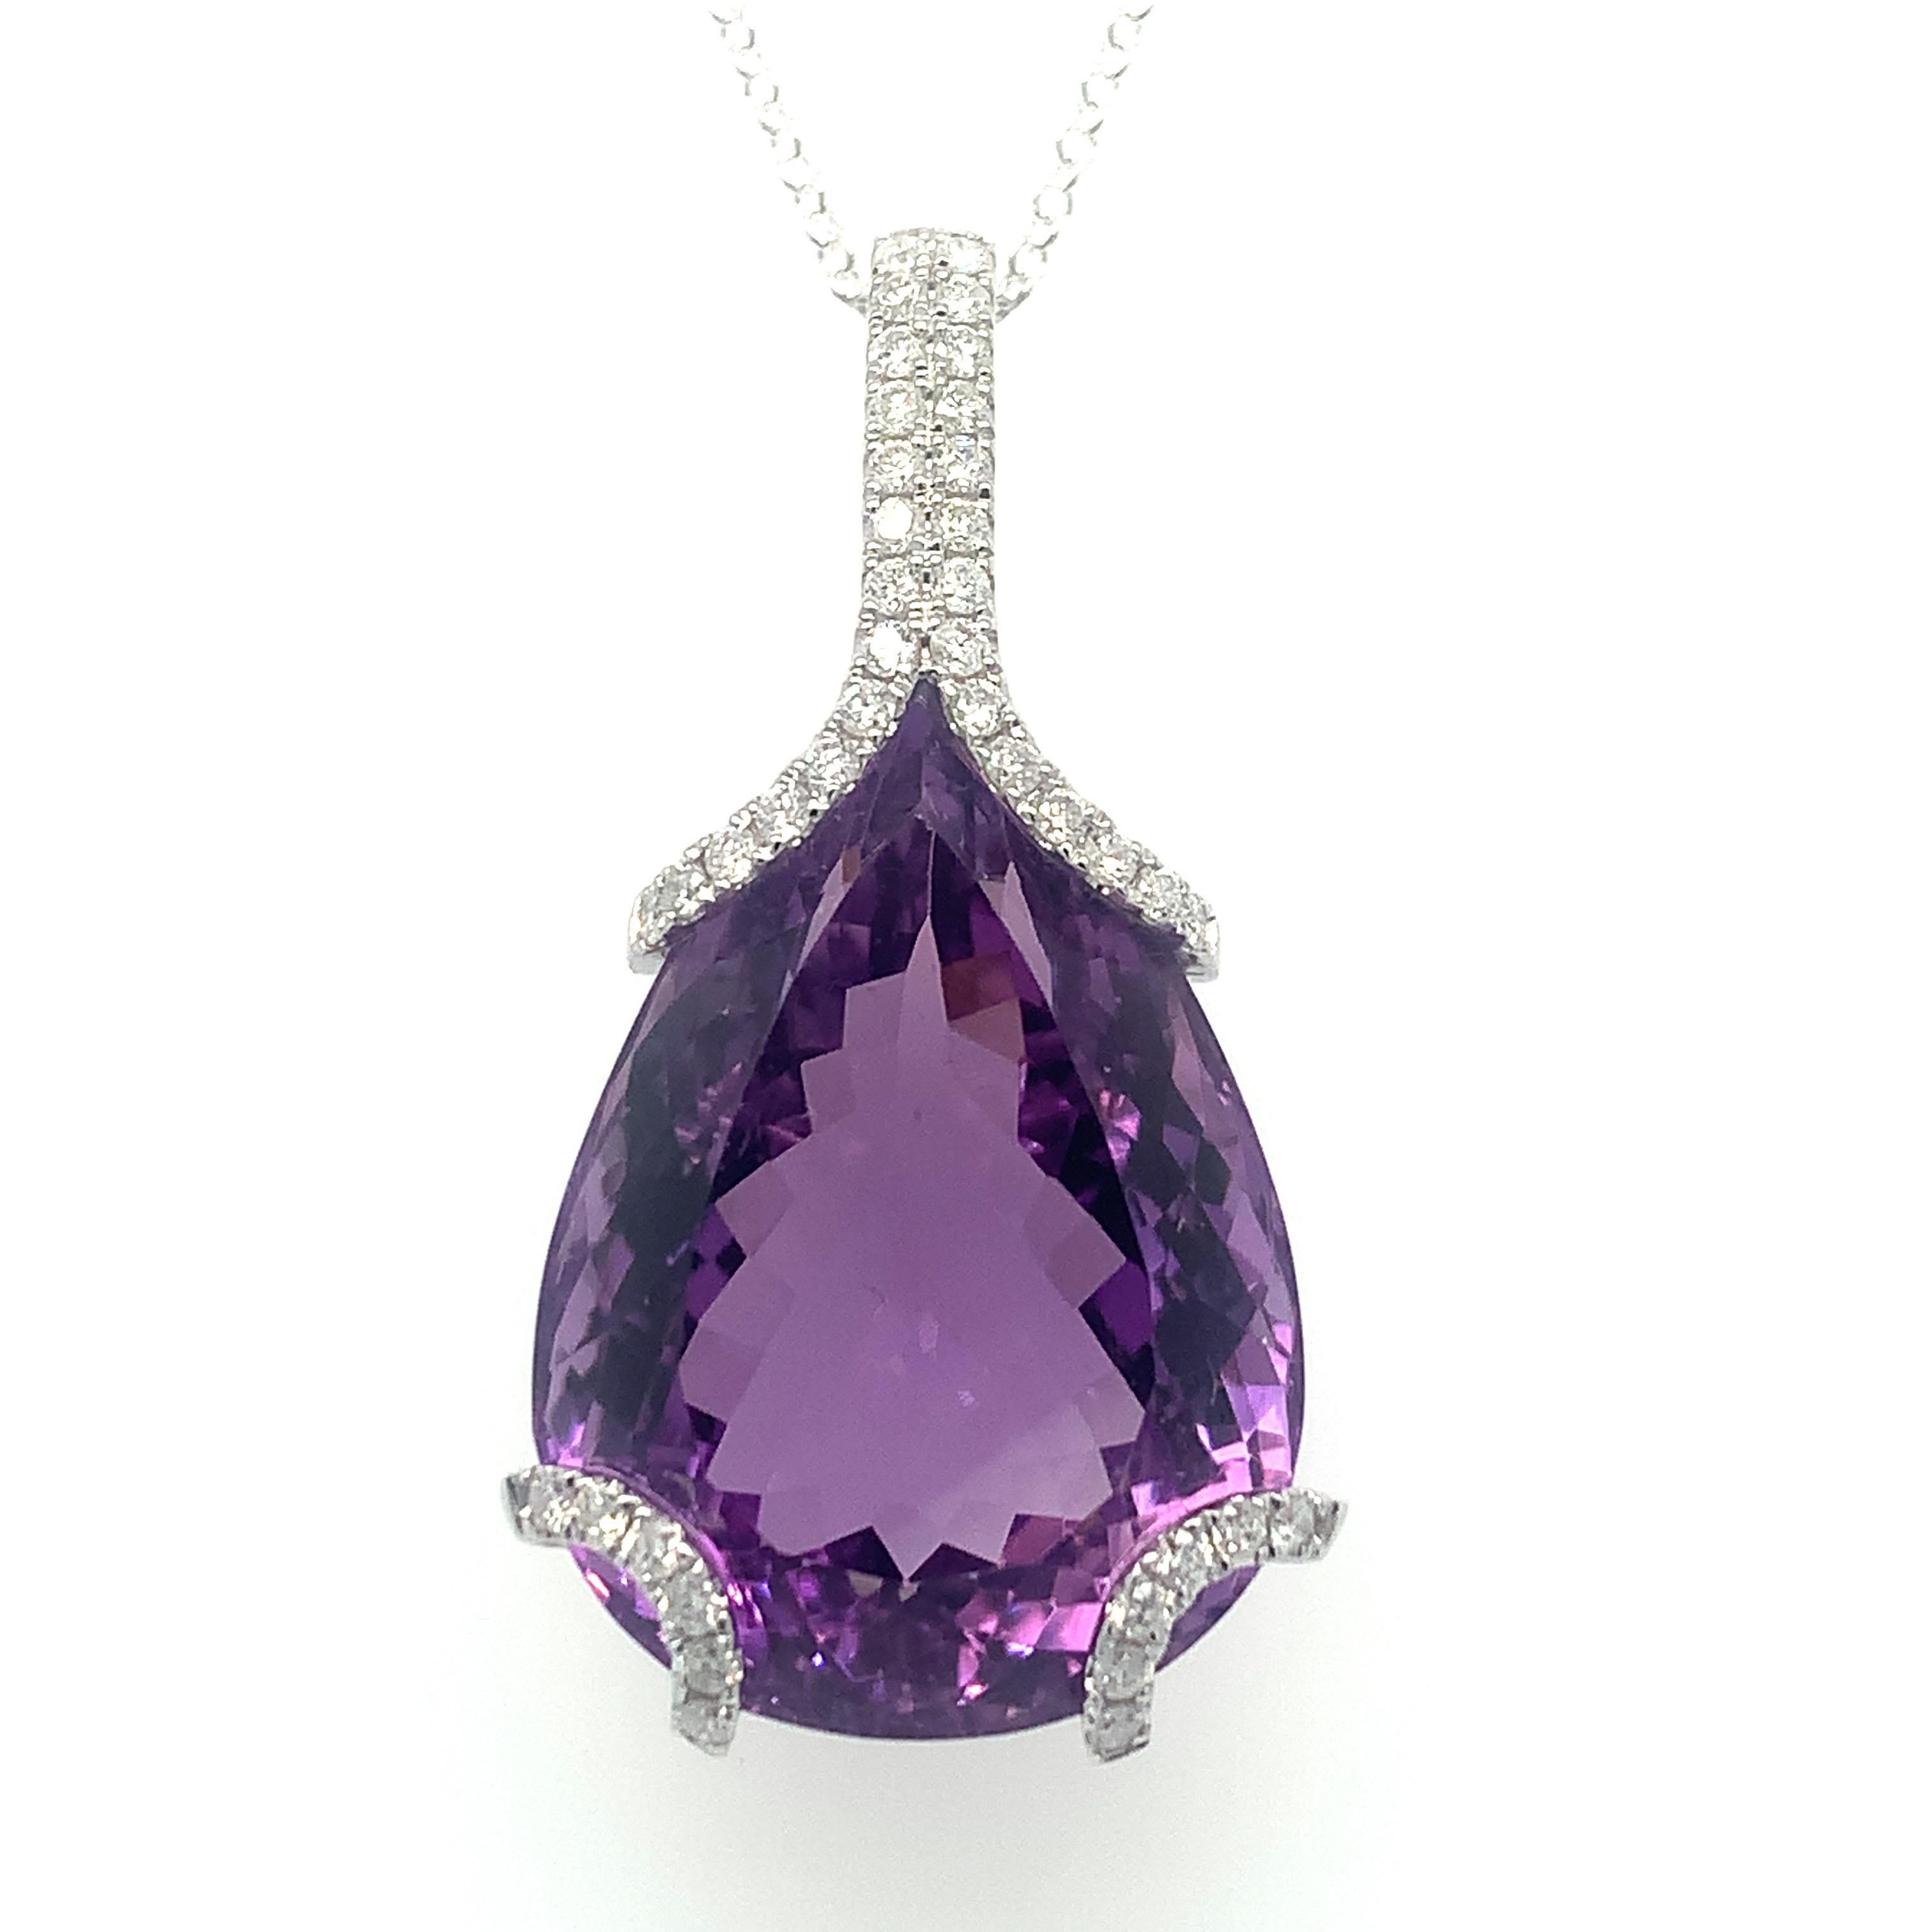 Exceedingly feminine natural amethyst pendant dazzles with the richness of its diamond details on prongs. Artistically crafted design boasts elegance and modernity. Hand cut and polished amethyst makes this piece an exceptional piece of